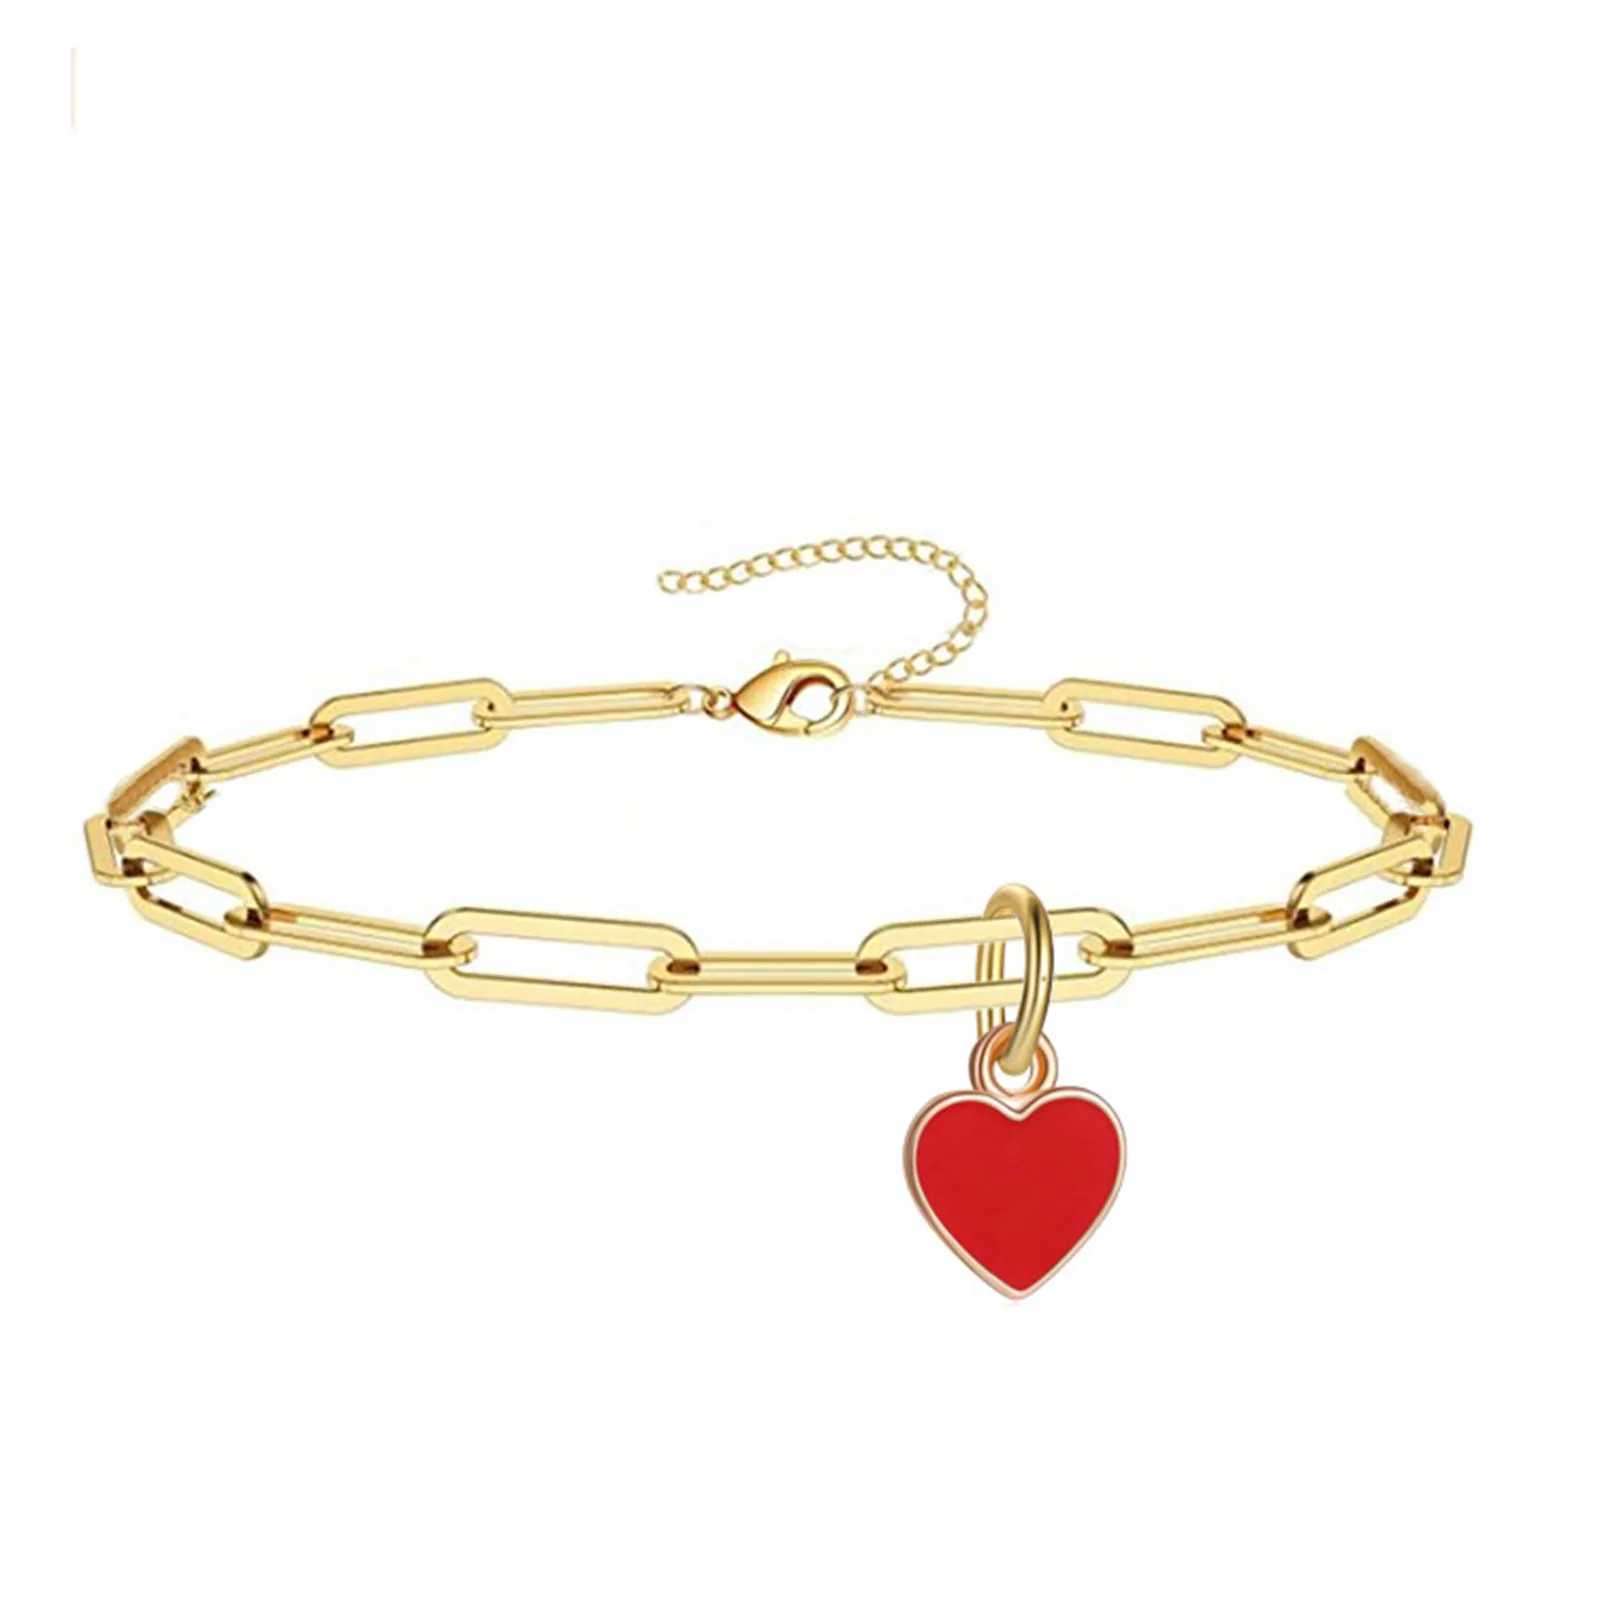 Stainless Steel Anklet Gold Color Link Chain Enamel Heart Summer Beach On Foot Ankle Bracelet Valentine's Day Jewelry 21cm long images - 6